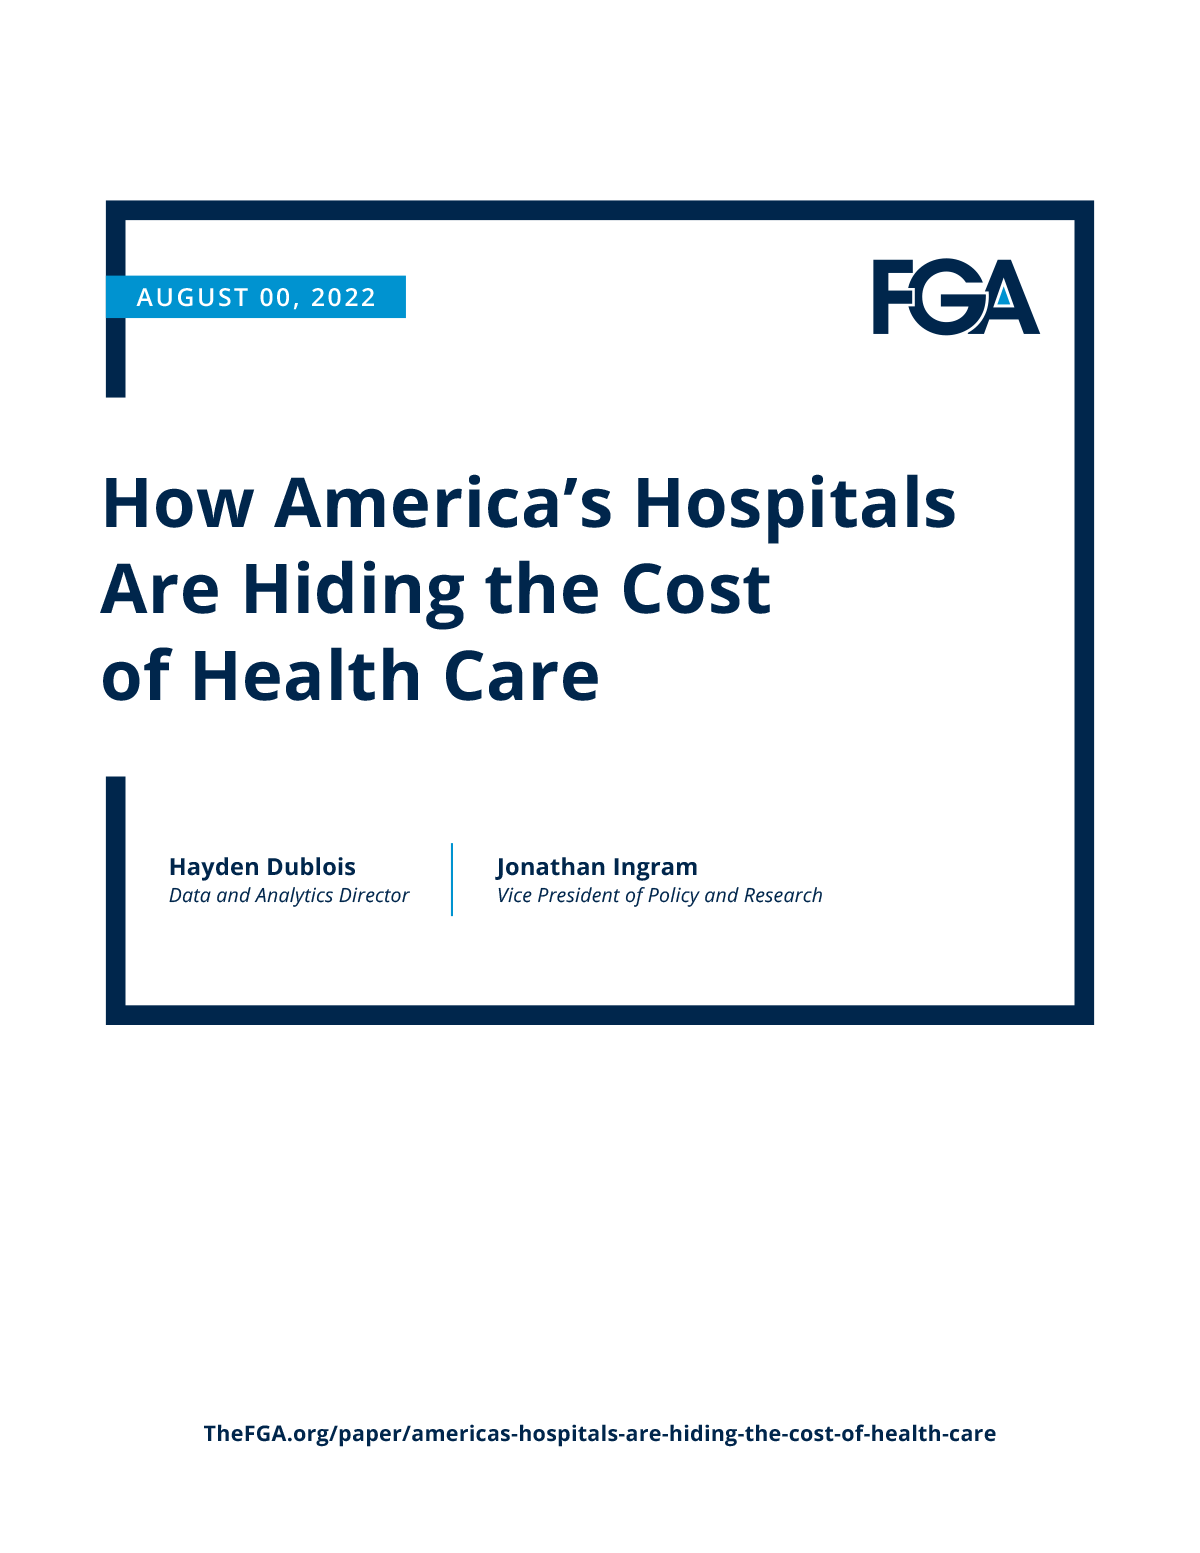 How America’s Hospitals Are Hiding the Cost of Health Care